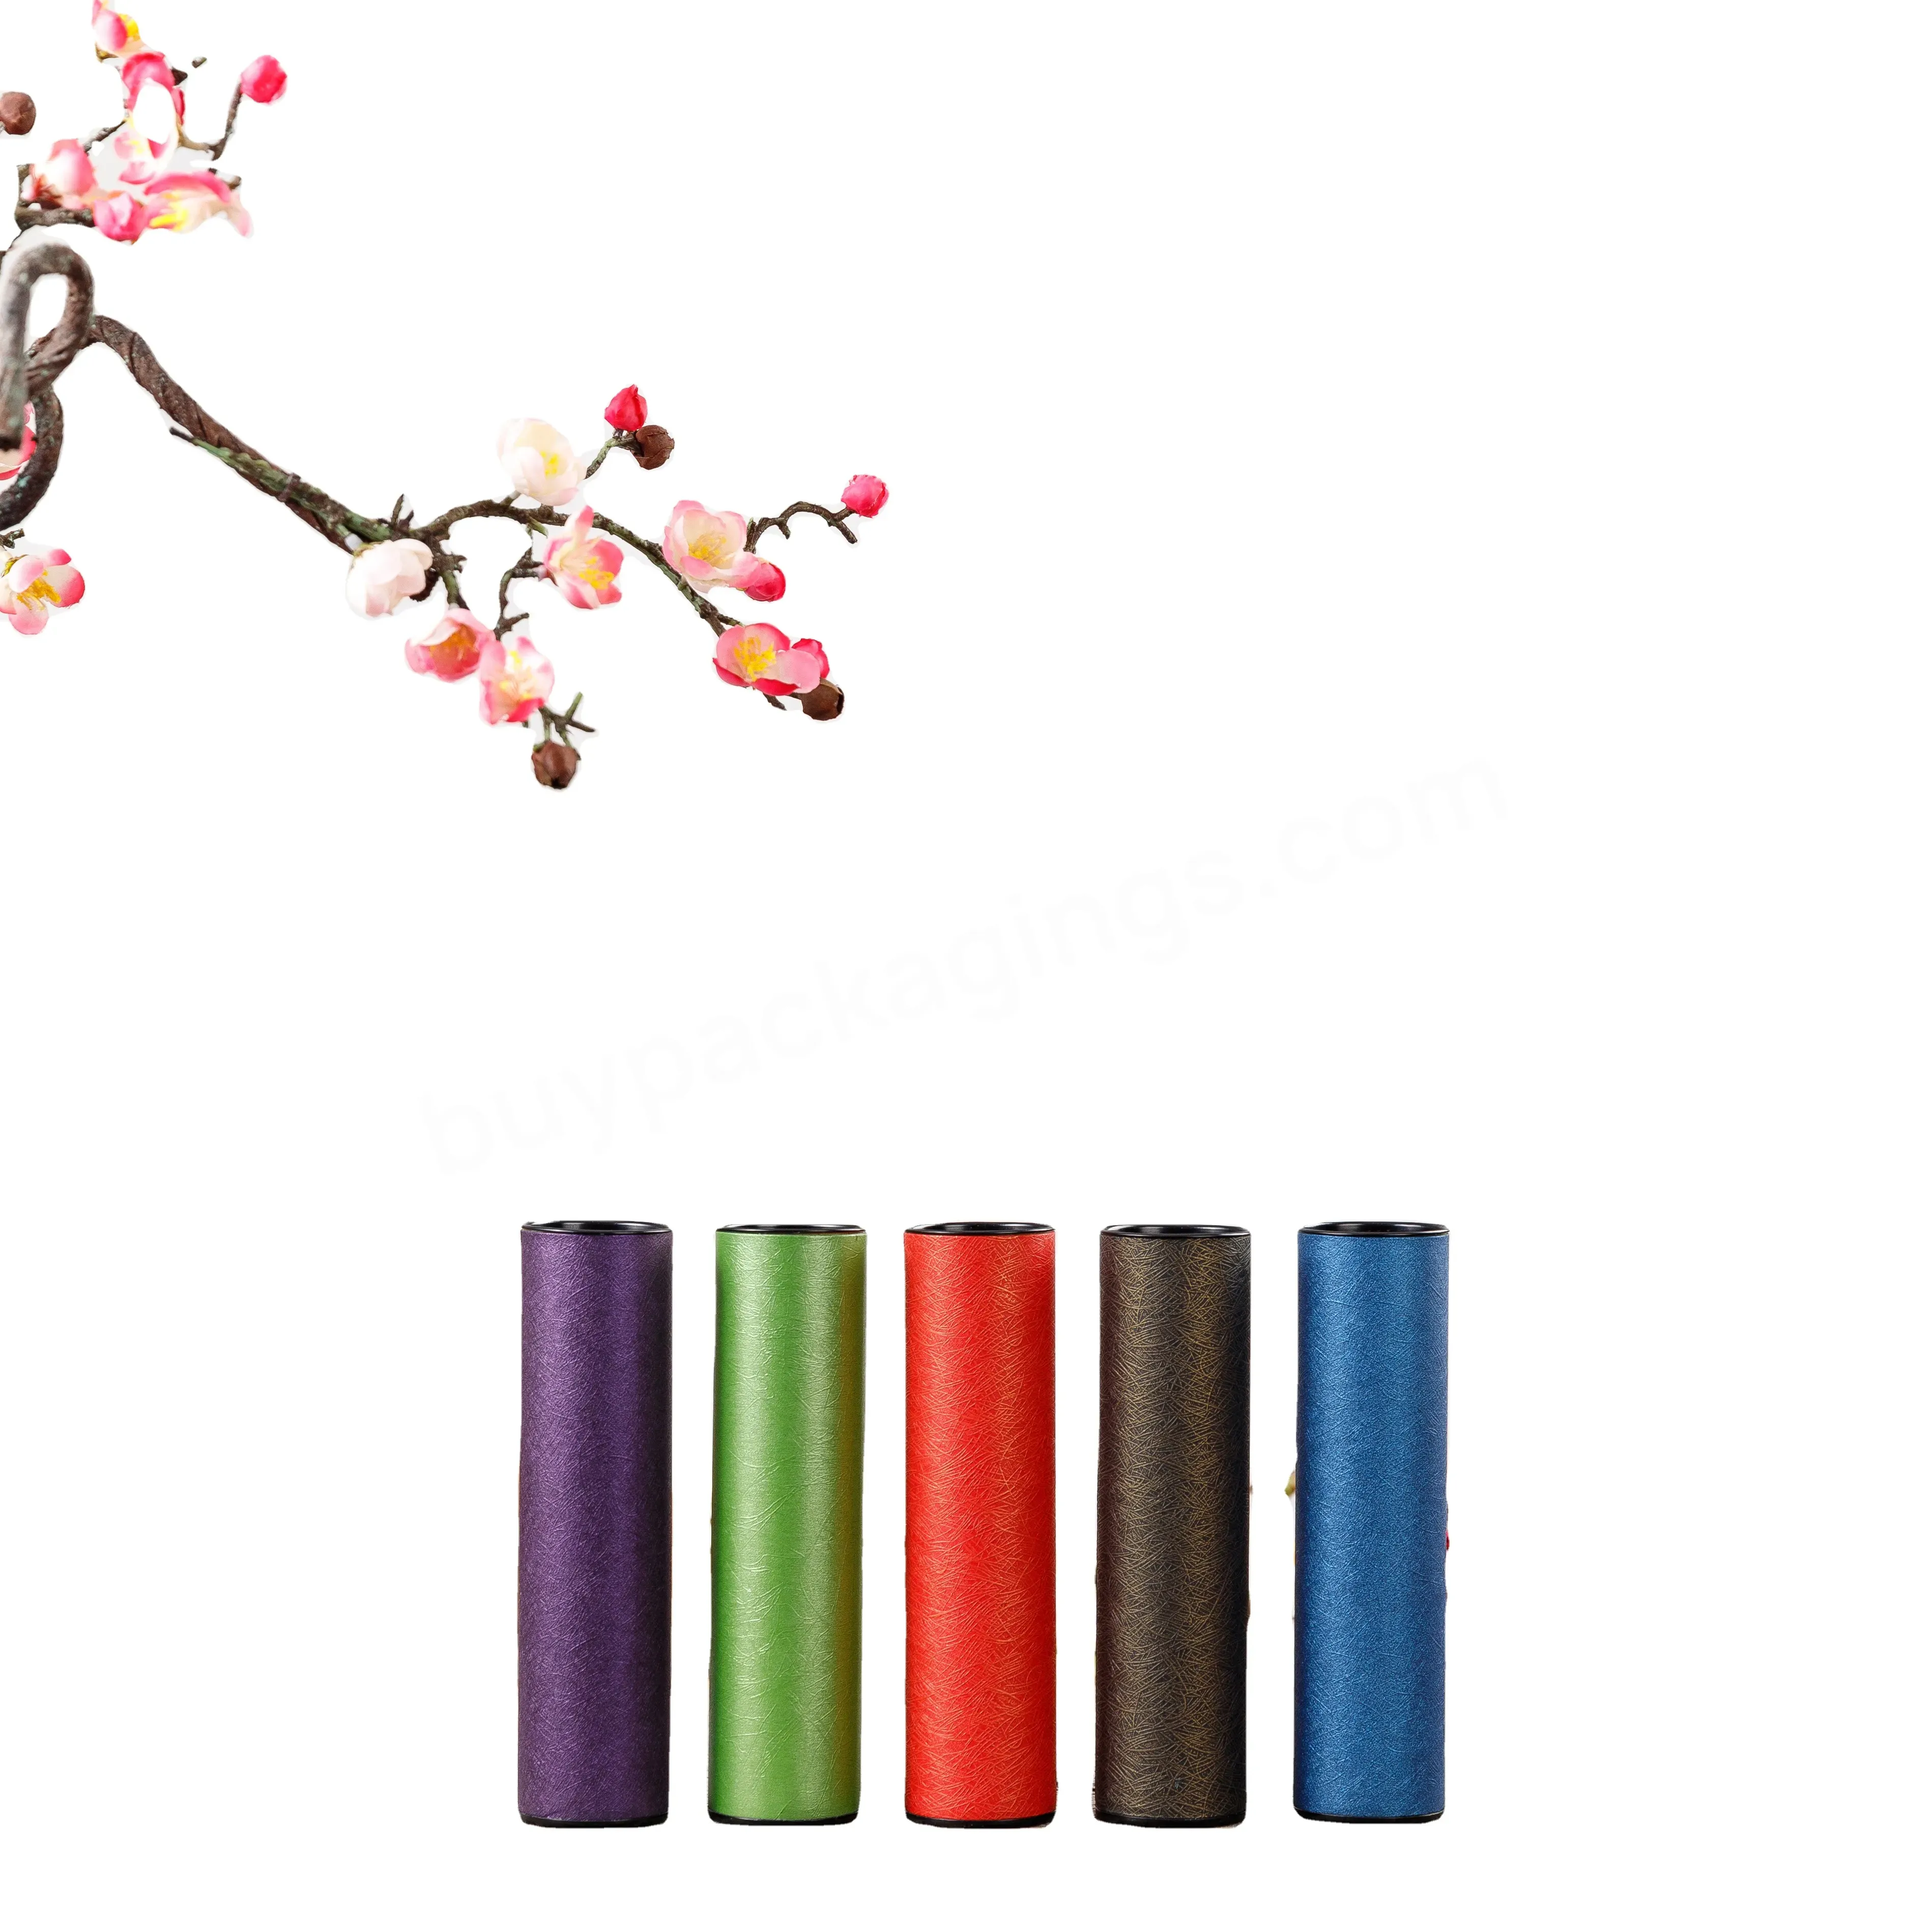 Tianyi Packing Custom Hot Stamping Cylinder Cardboard Tea Box Packaging Empty Cosmetic Crepe High Quality Colorful Paper Tube - Buy Custom Hot Stamping,Box Packaging Empty Cosmetic,Colorful Paper Tube.